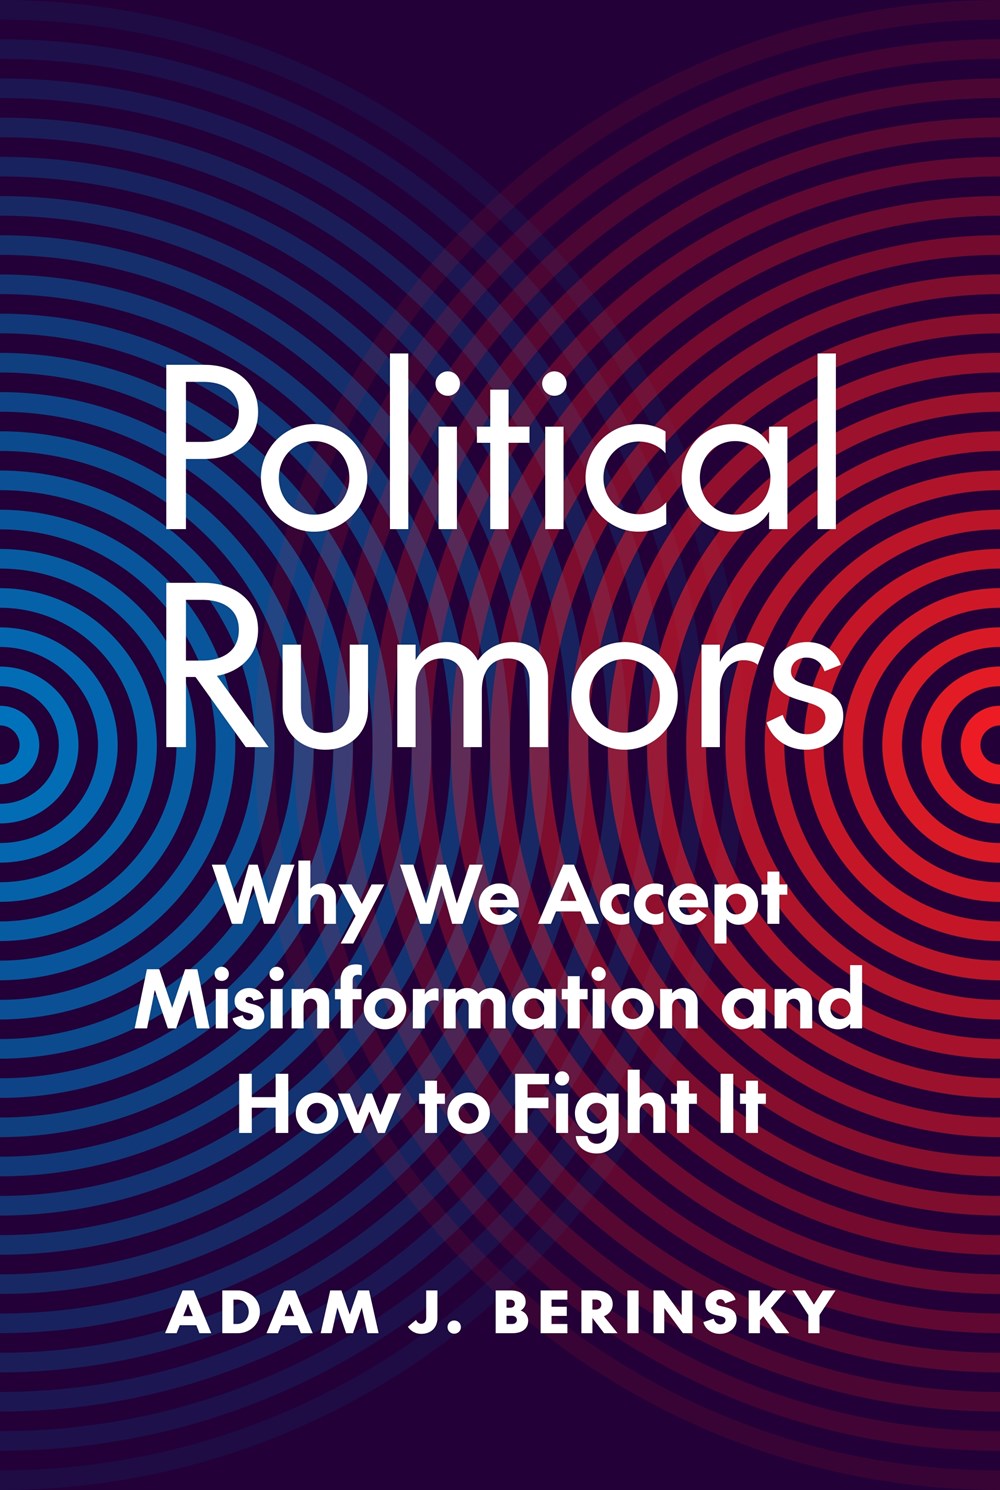 Political Rumors: Why We Accept Misinformation and How To Fight It